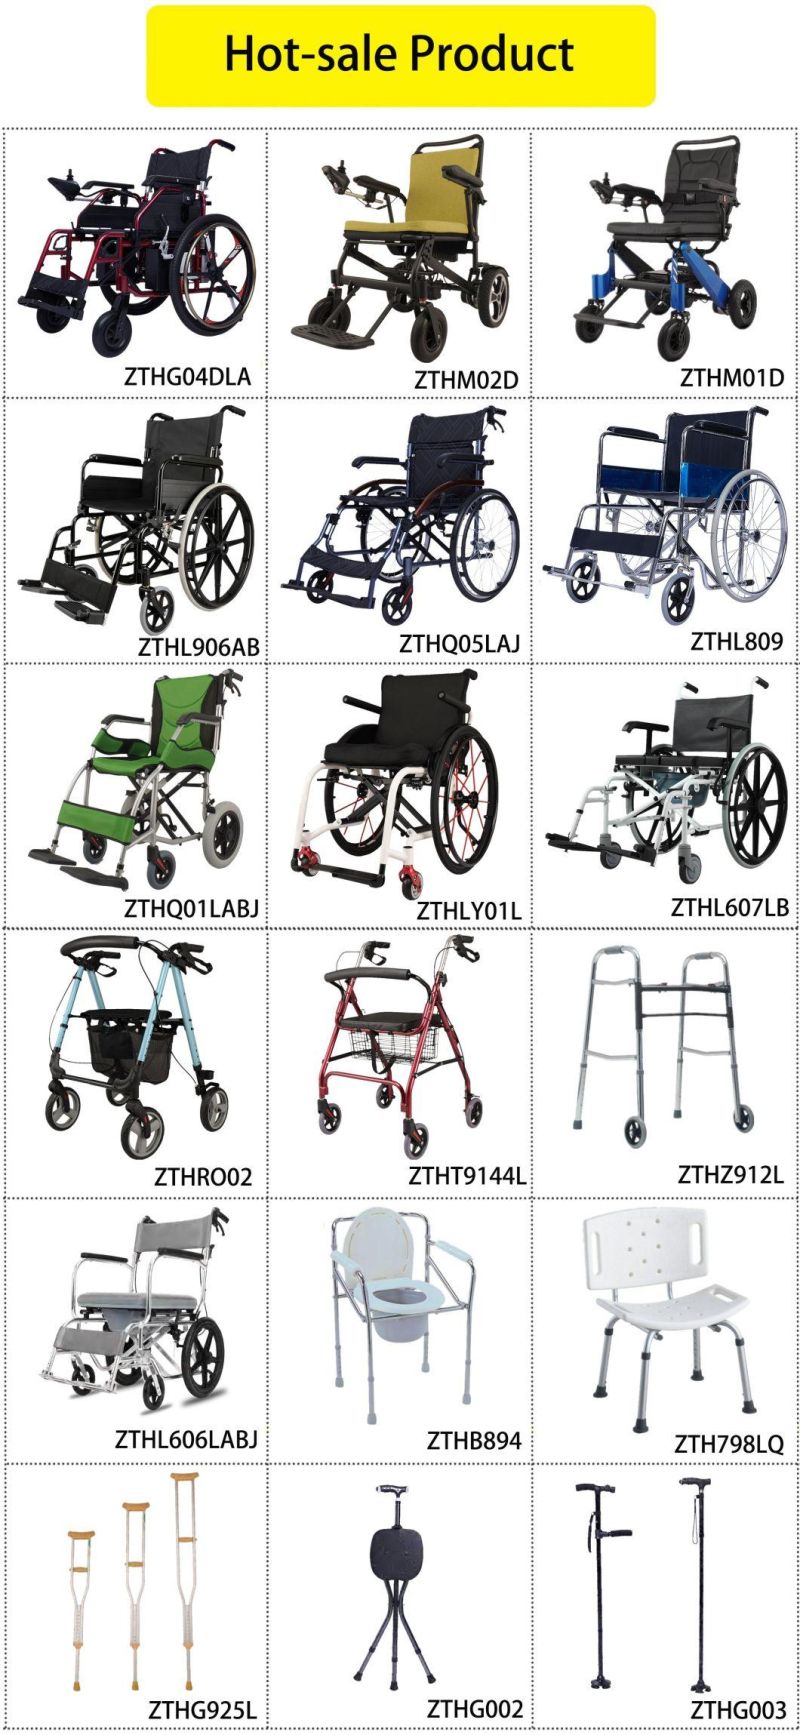 with 2 Wheels Disabled/Elderly People Indoor and Outdoor Easy Carry Steel Light Weight Height Adjust Walker Frame Orthopedic Rehabilitation Walking Assistance